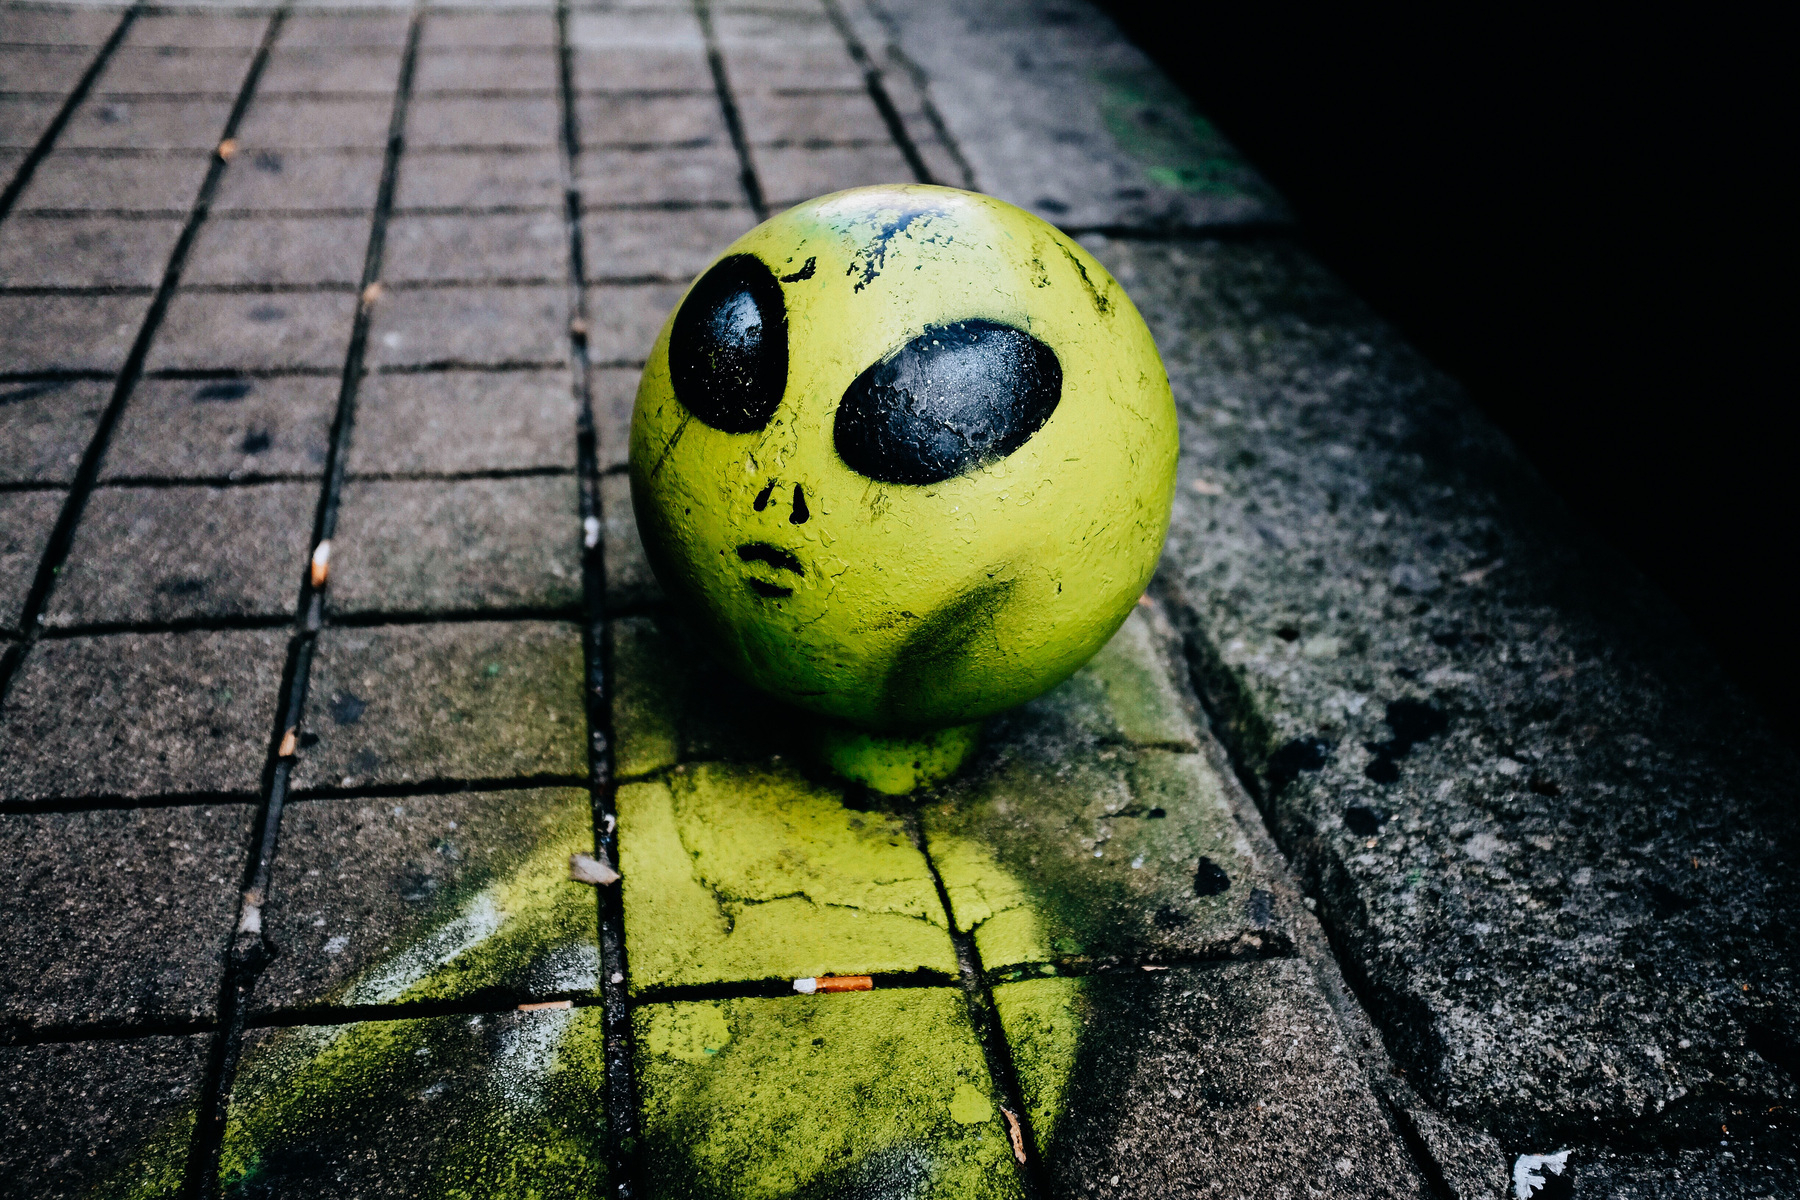 Urban furniture can turn into something surreal. Someone painted a steel ball on the sidewalk into an alien’s head, and added a body. 